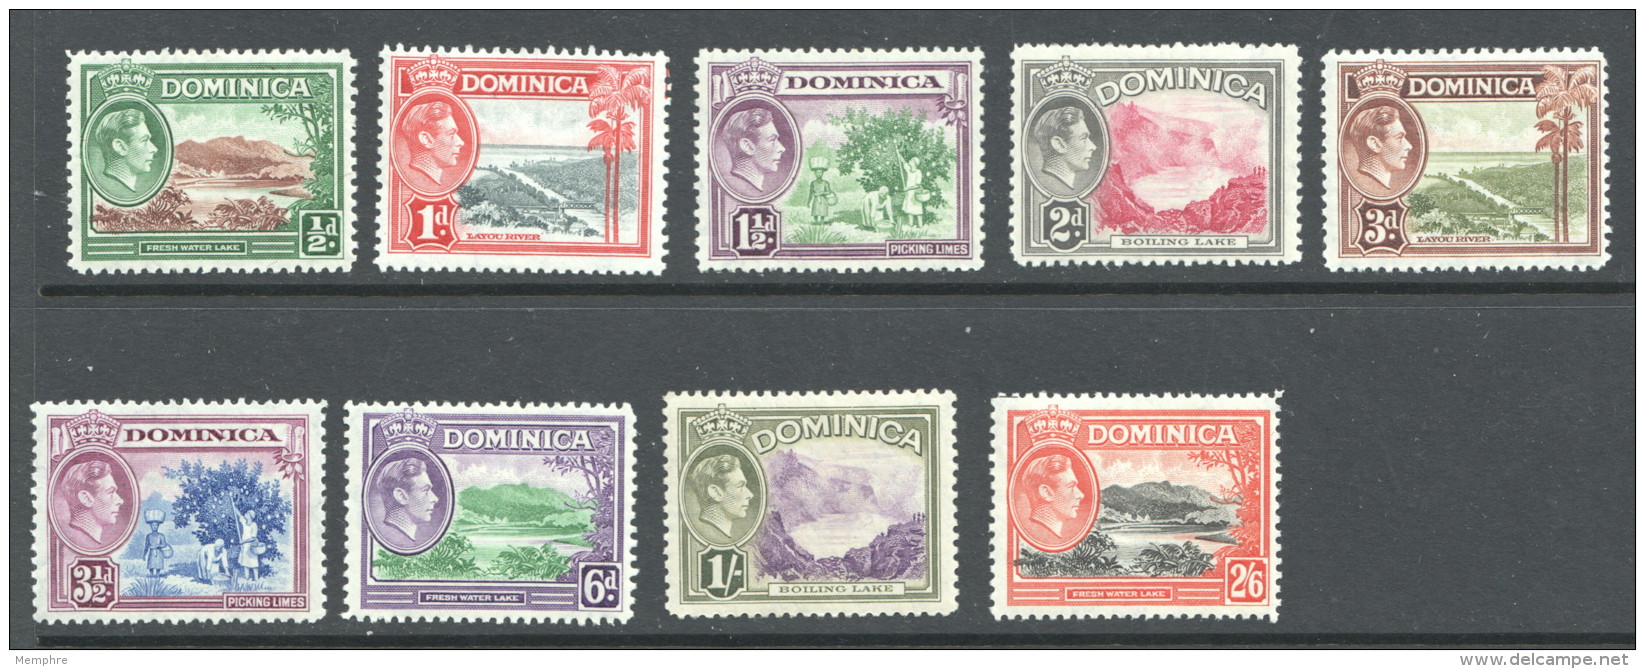 1938  George VI Definitives  9 Values MM - MH - Dominica (...-1978)